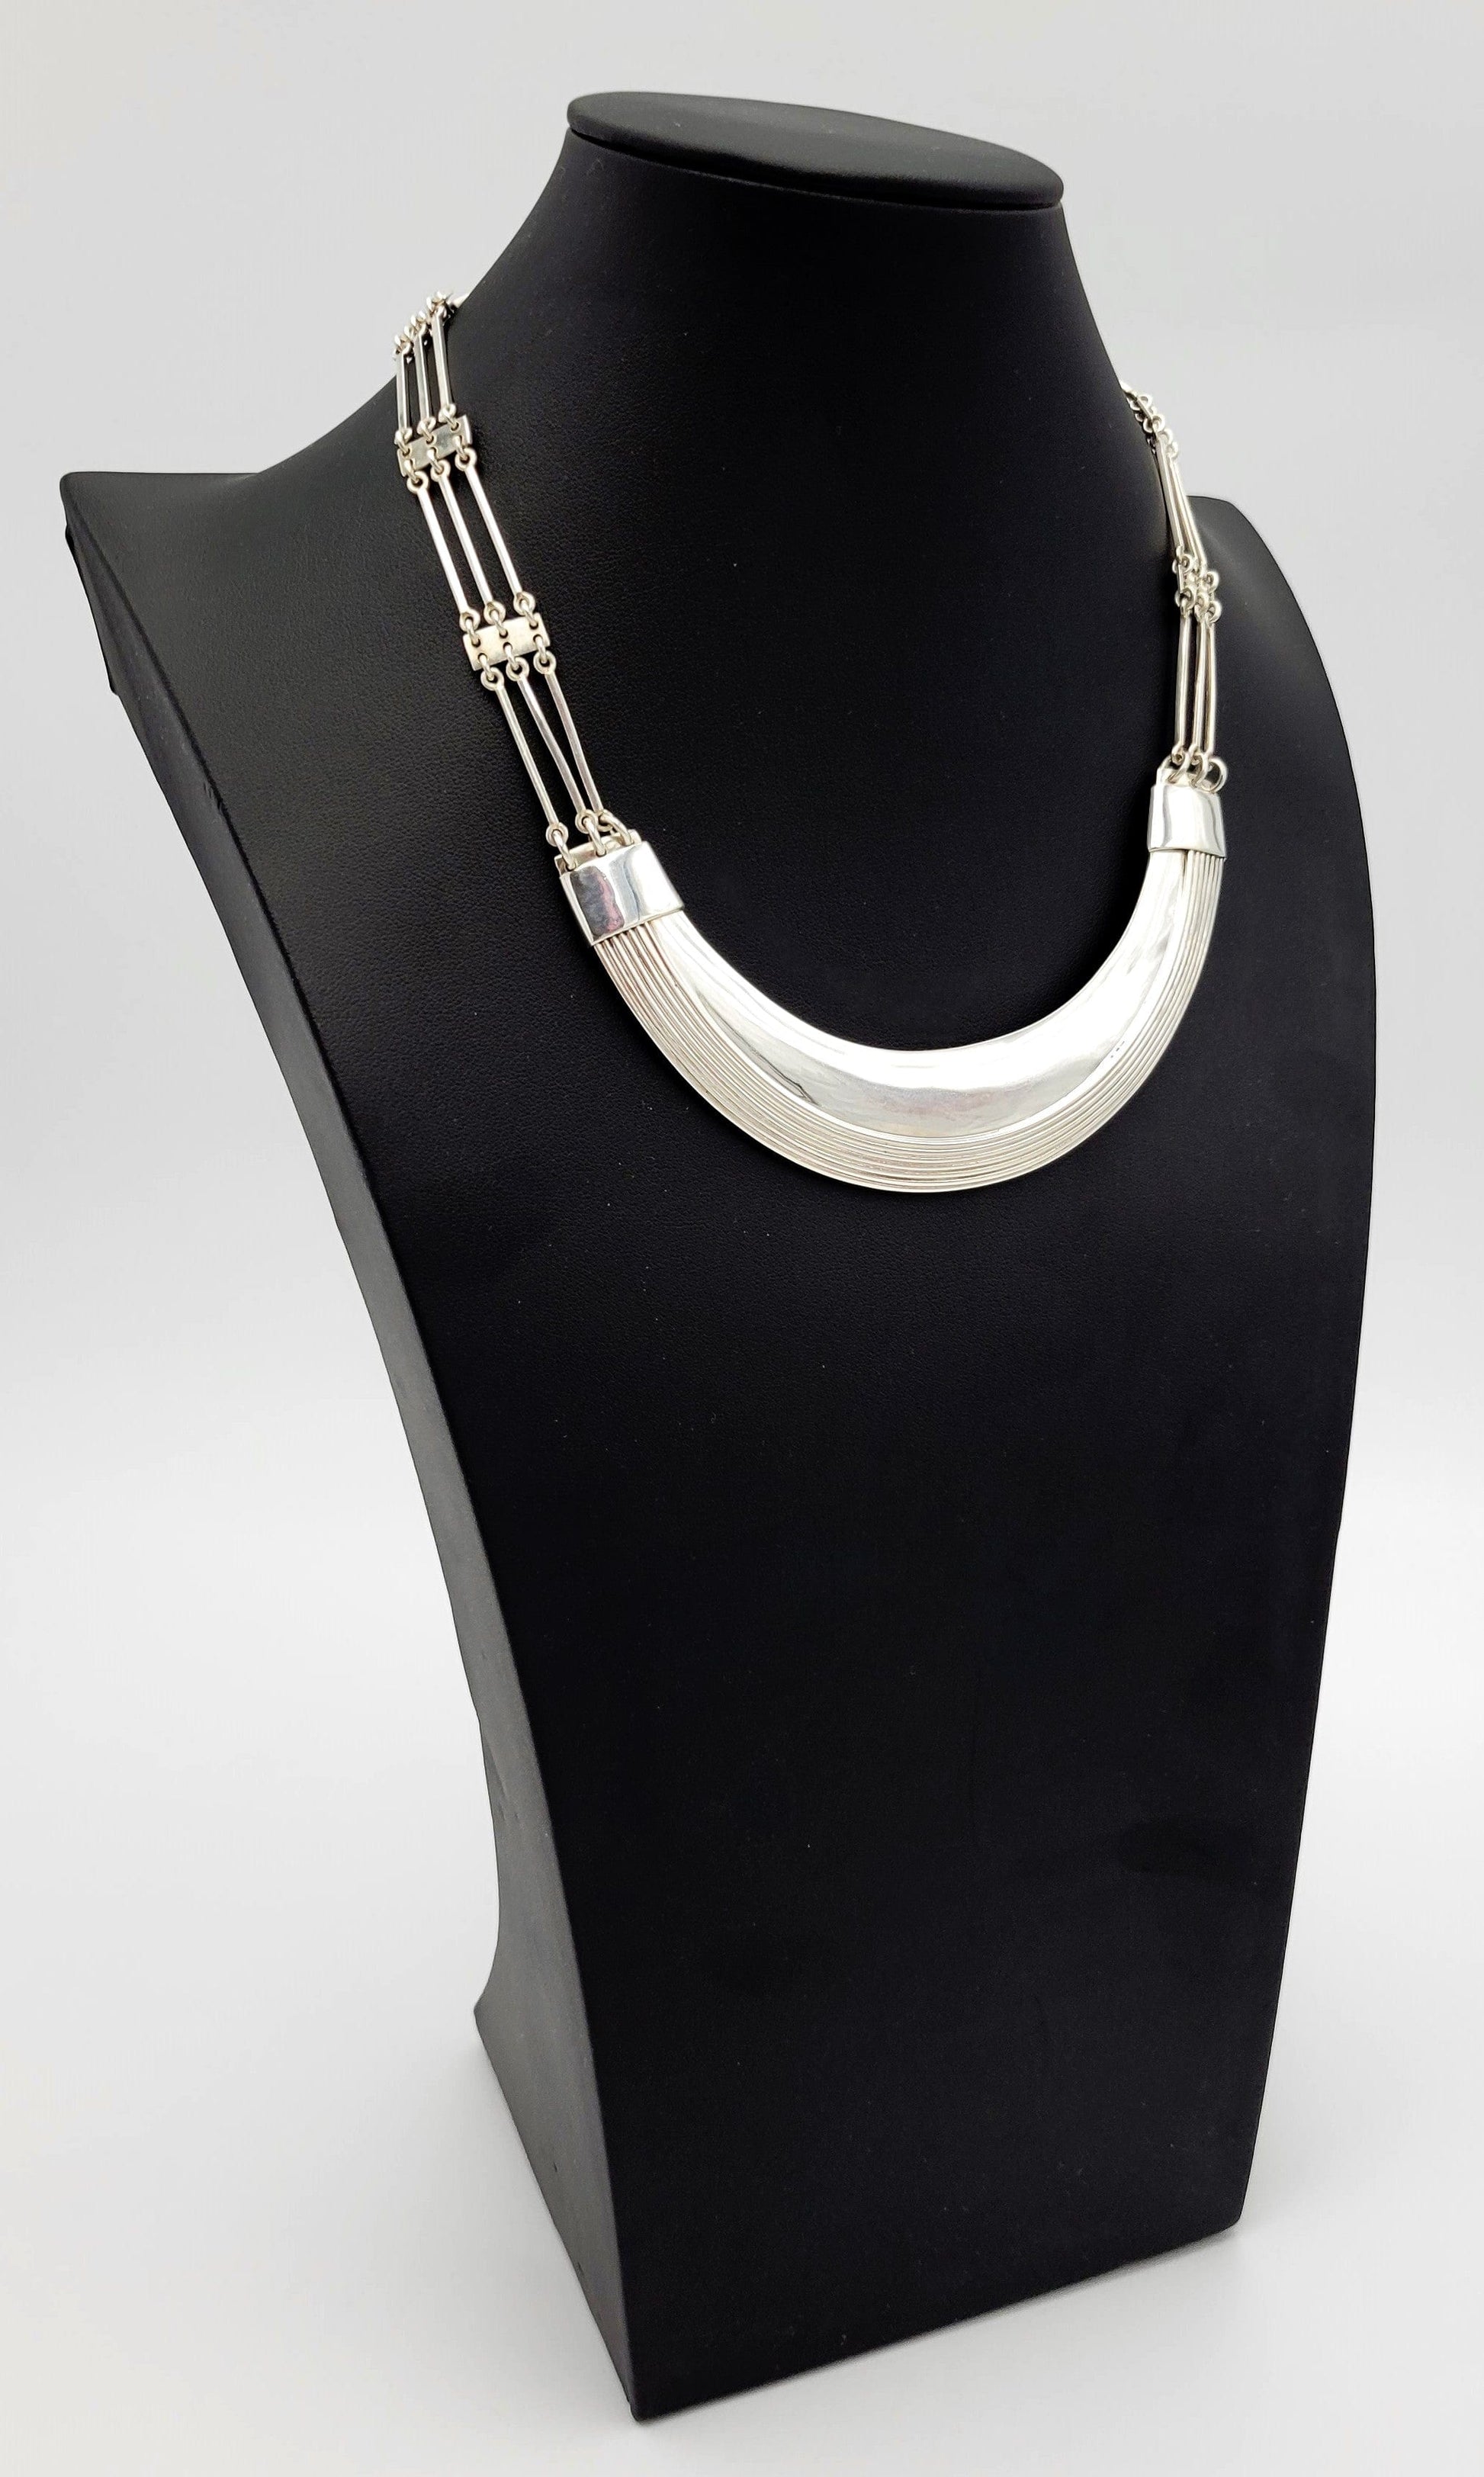 Erika Hult de Corral "Ric" Jewelry Superb Taxco Erika Hult de Corral "Ric" Sterling Modernist Statement Necklace 1980s